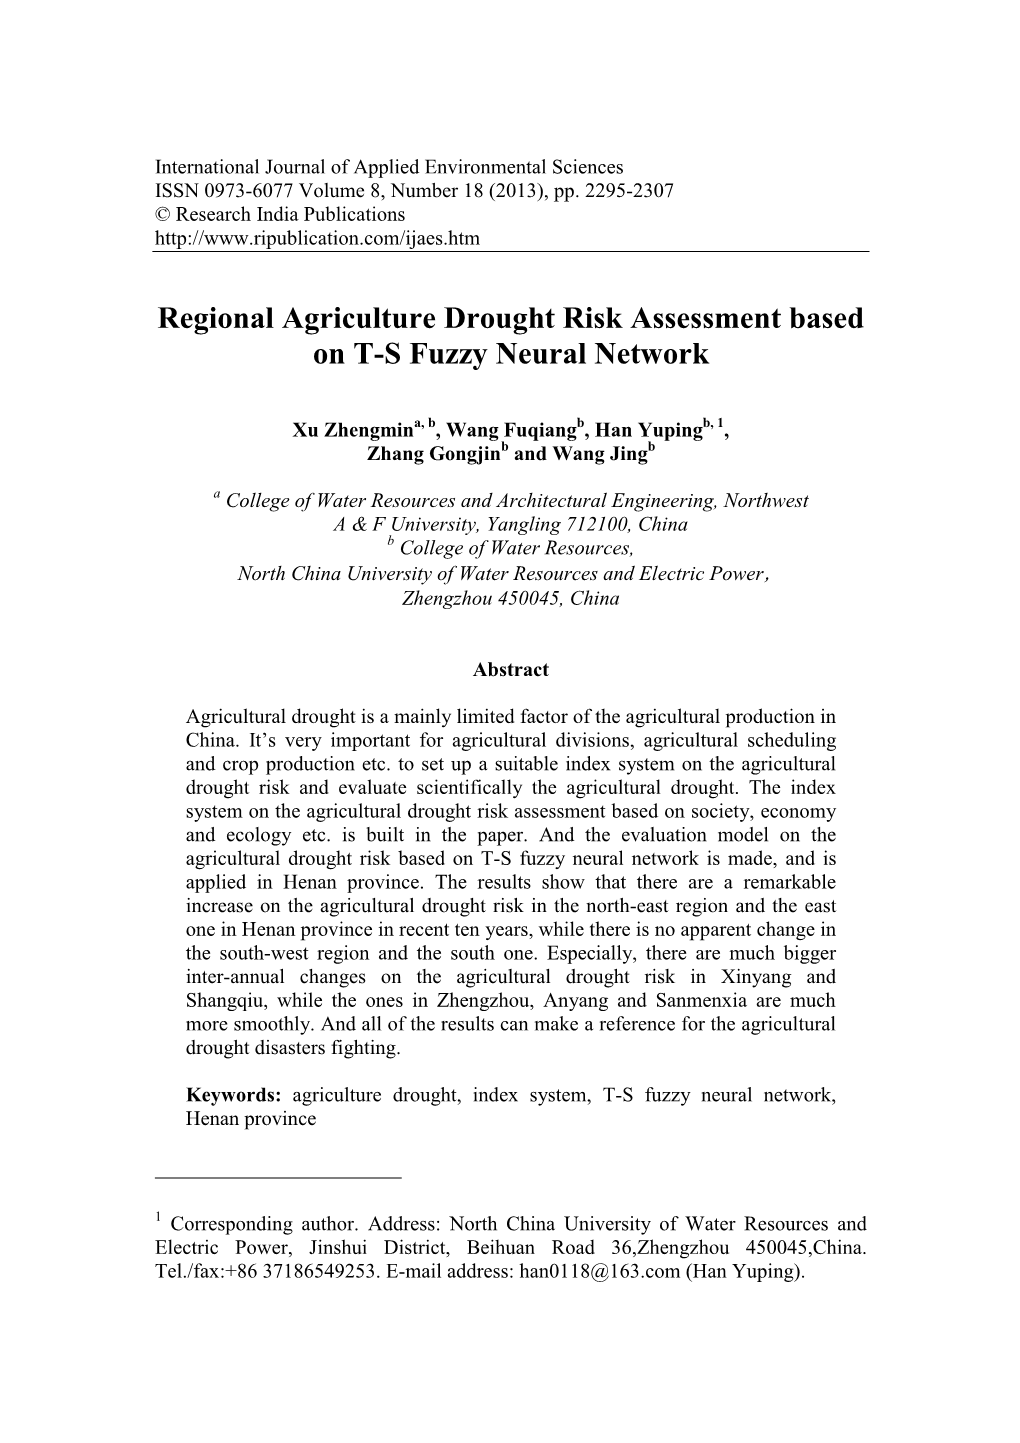 Regional Agriculture Drought Risk Assessment Based on T-S Fuzzy Neural Network